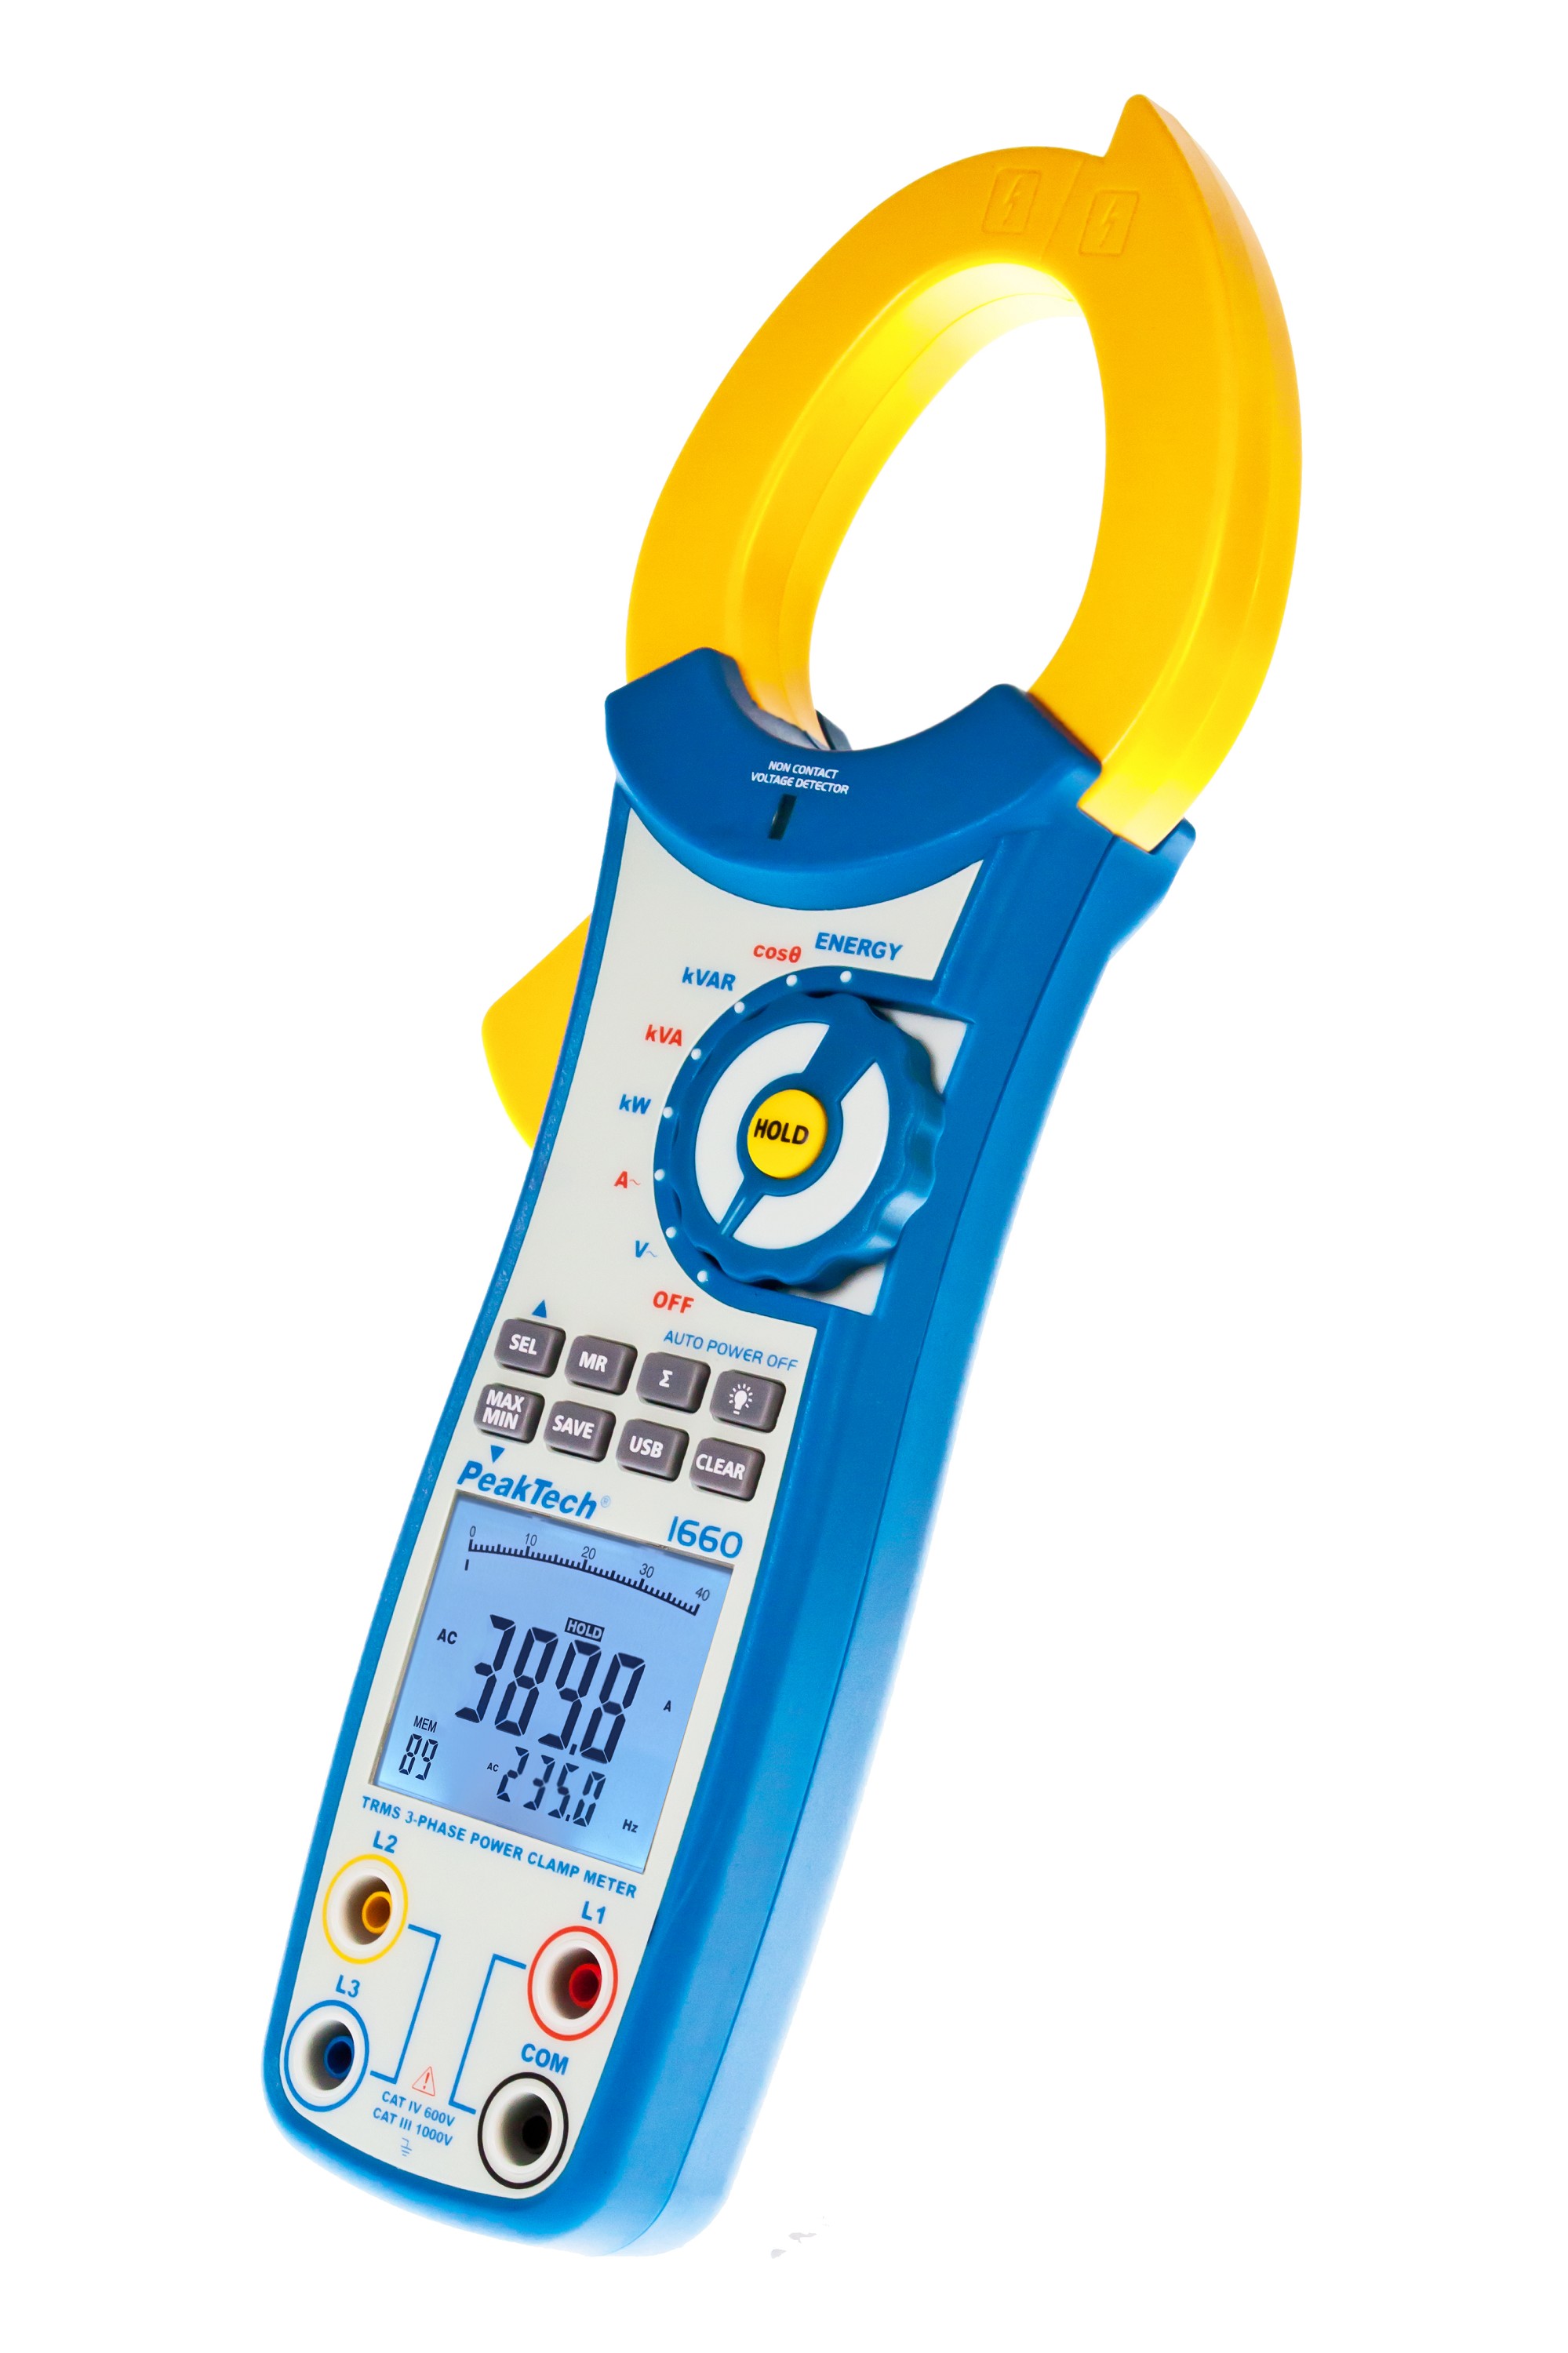 «PeakTech® P 1660» TrueRMS power clamp meter 1000 A AC up to 750 kW